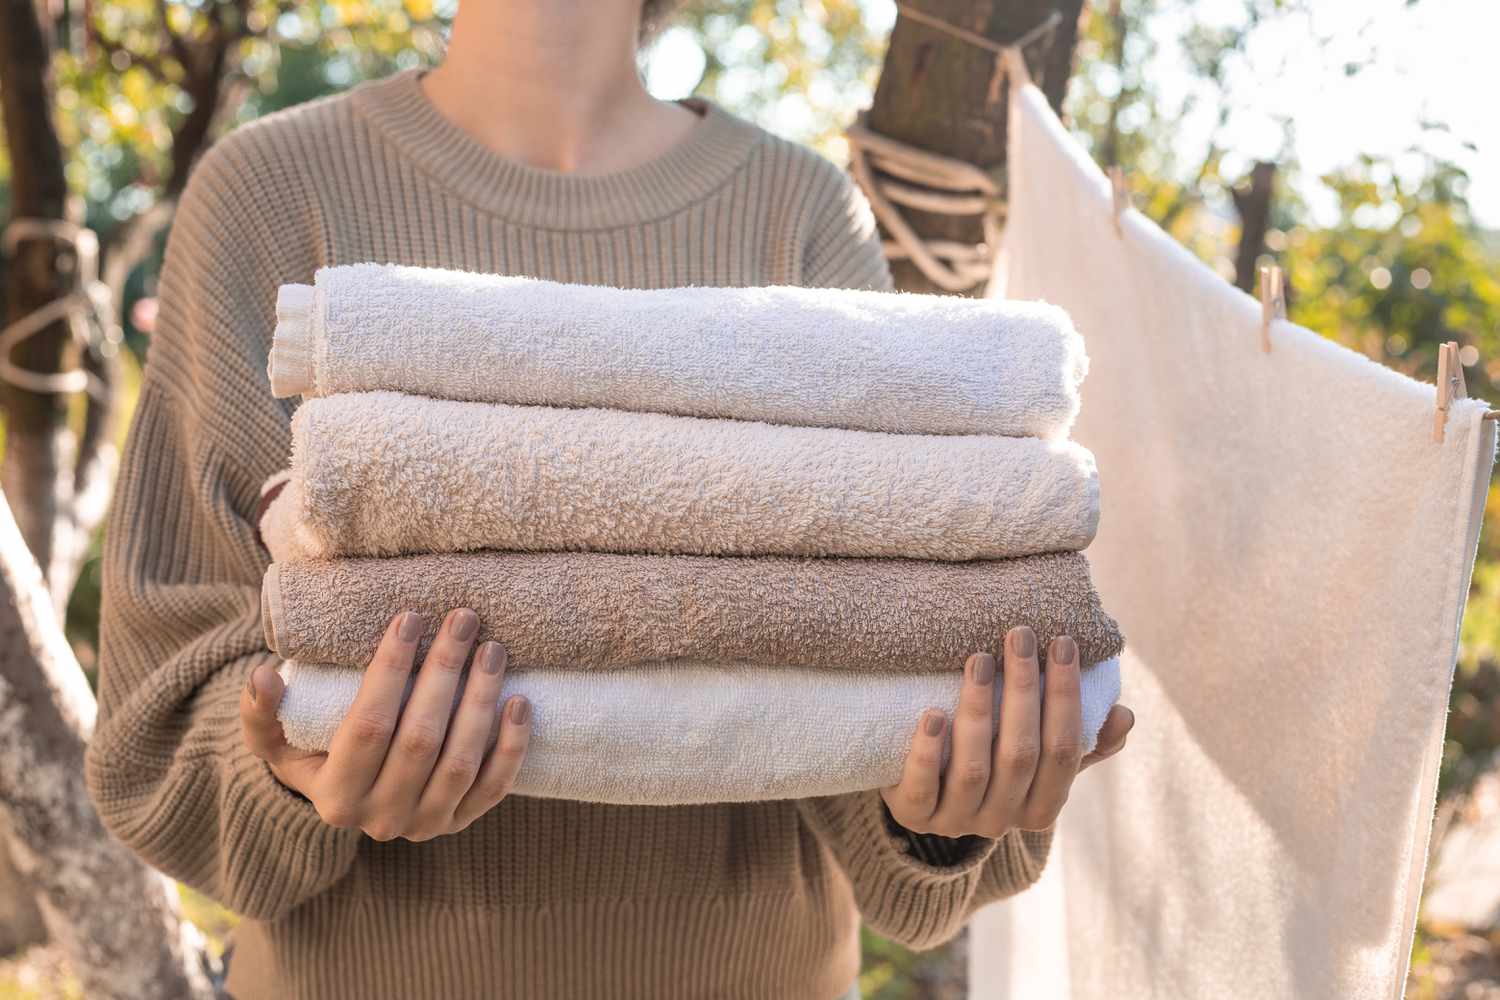 Should You Use Fabric Softener On Towels?